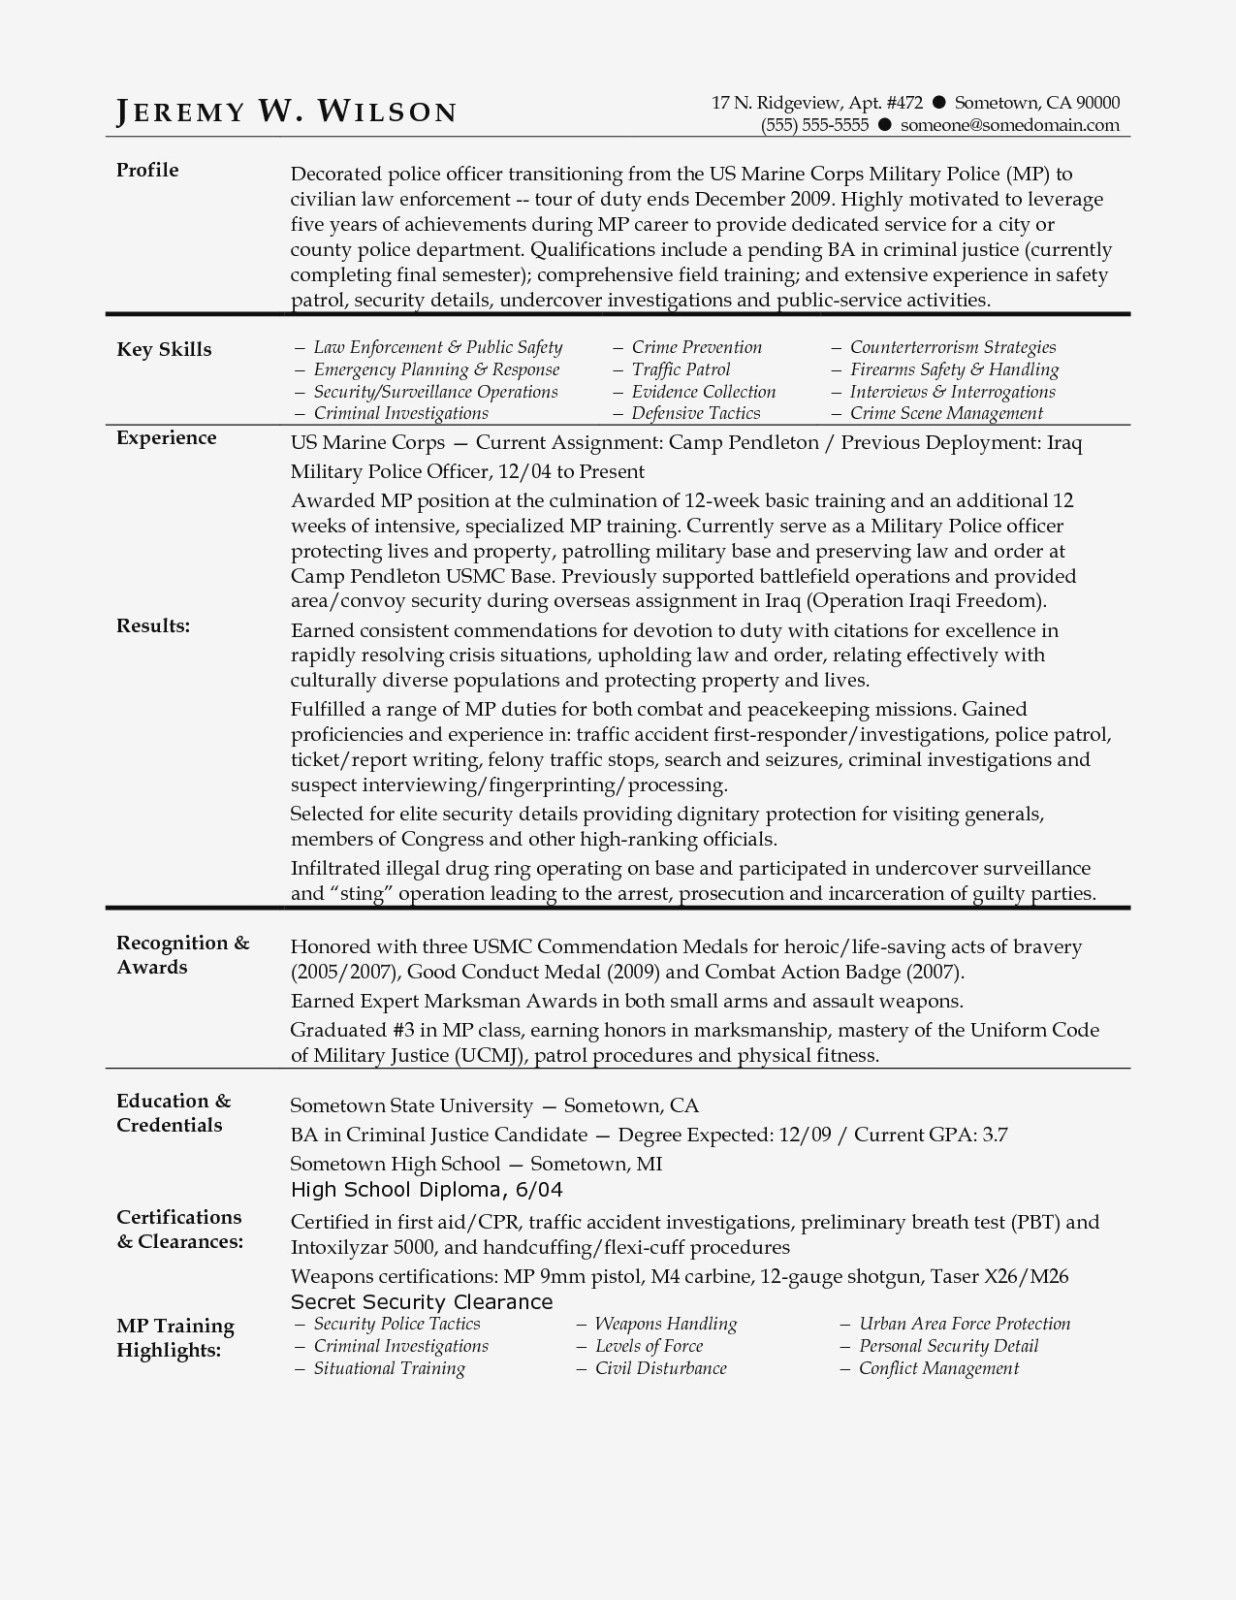 Sample Resume for Retired Person Returning to Work Police Officer Resume Templates, Police Officer Resume Templates …